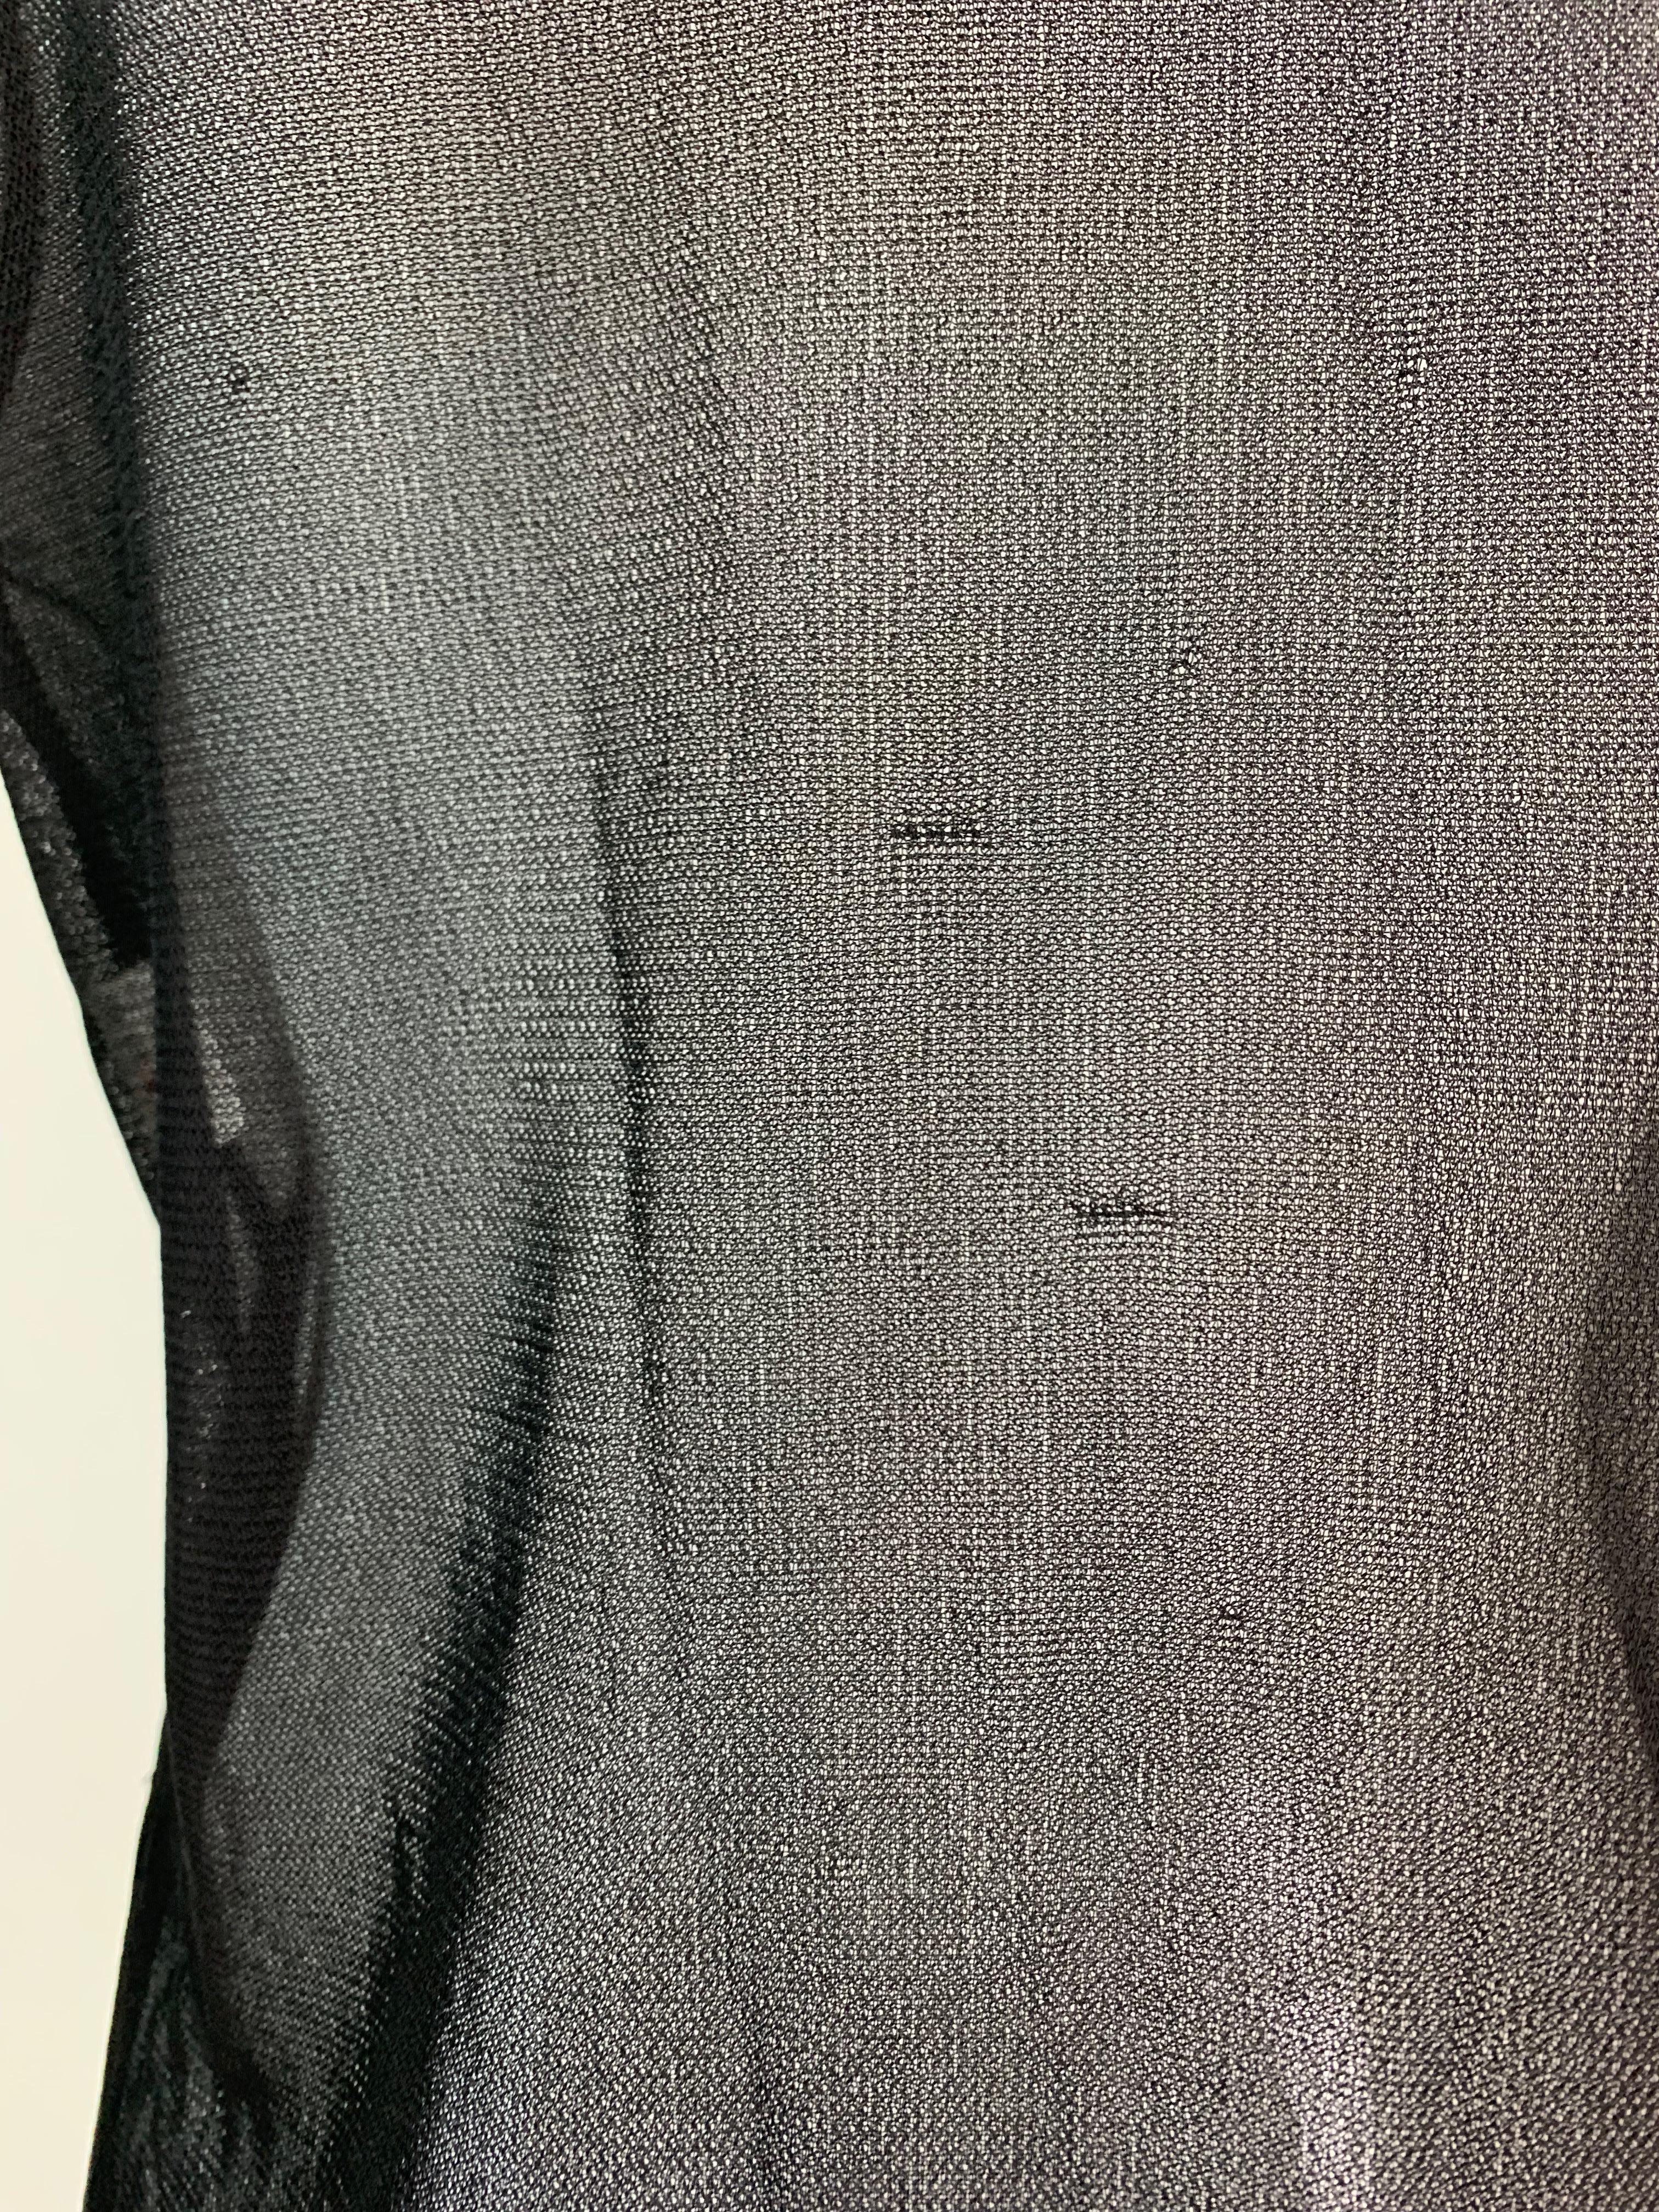 S/S 1997 Gucci by Tom Ford Sheer Black Gauze Plunging Blouse Top 1